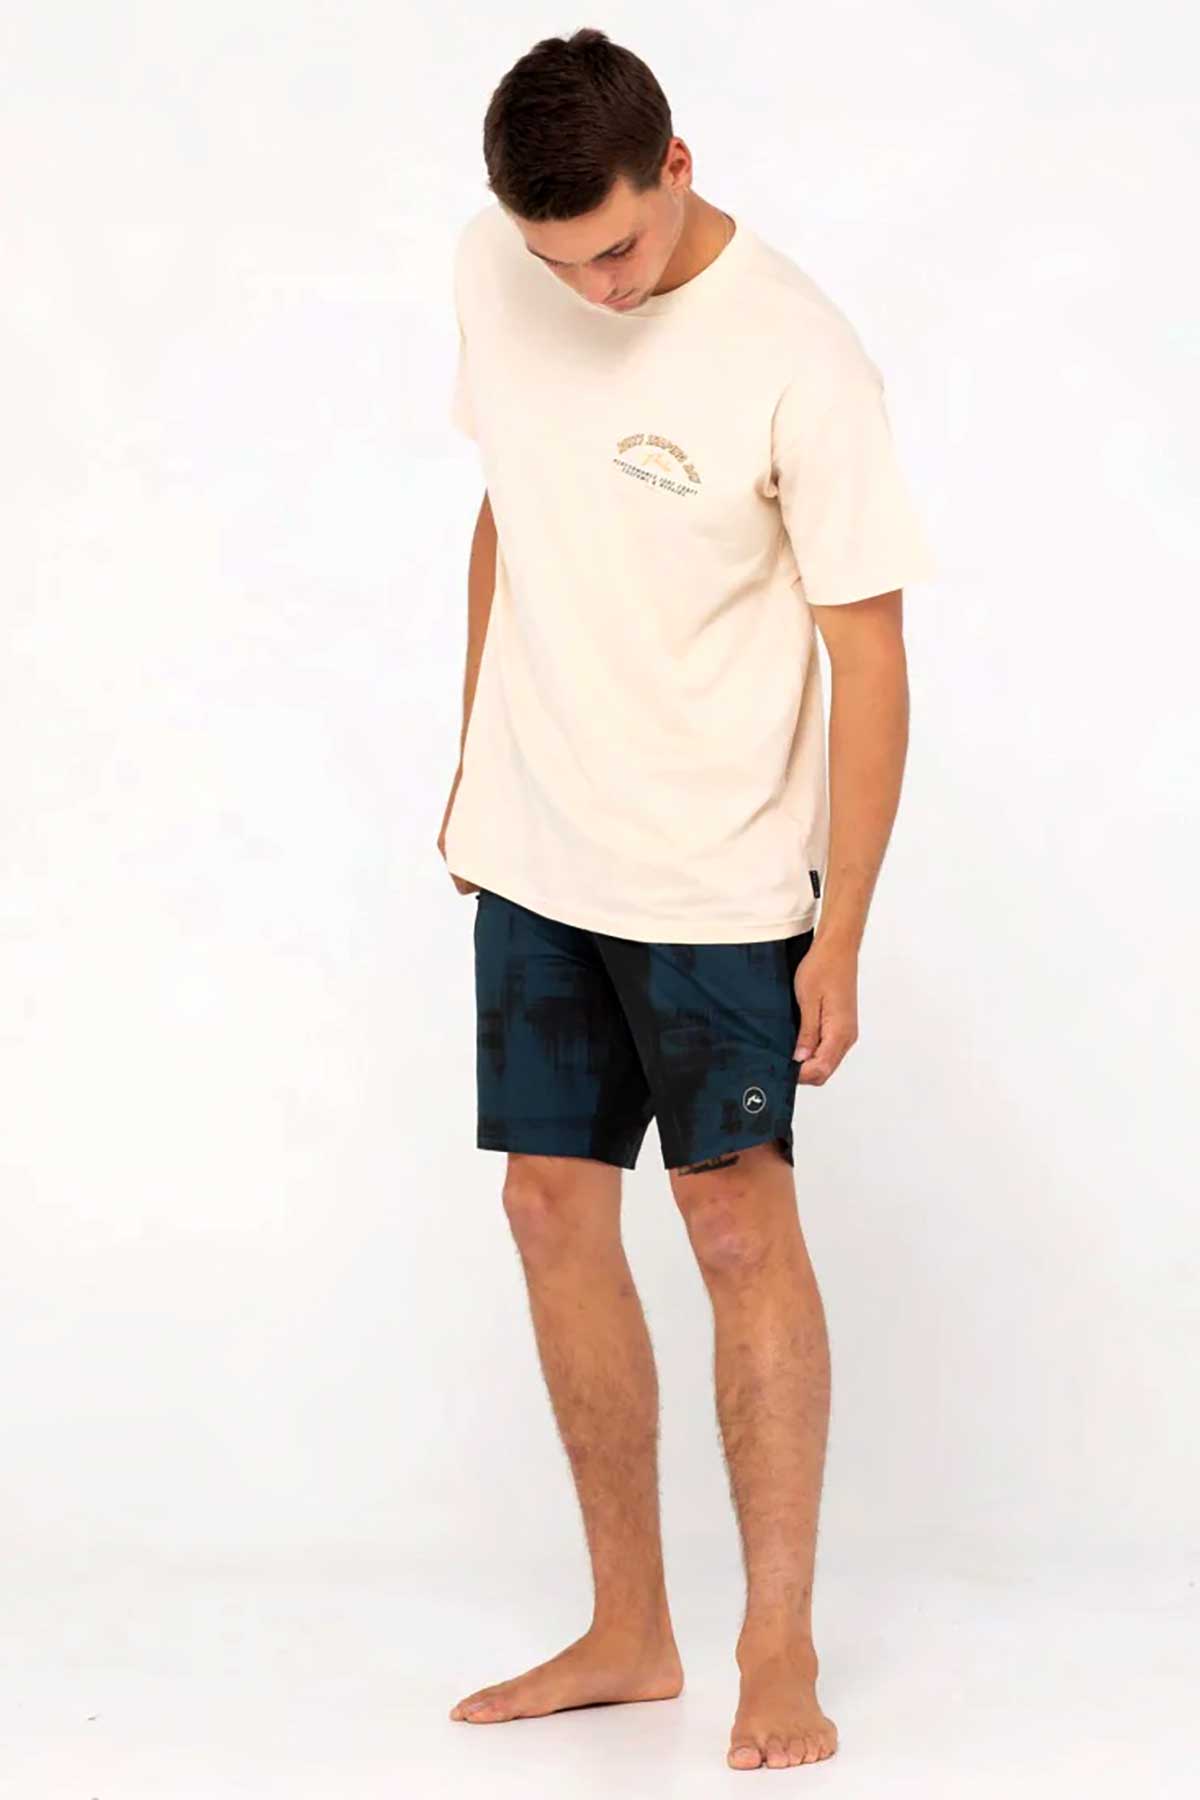 Rusty Roller Boardshort outfit